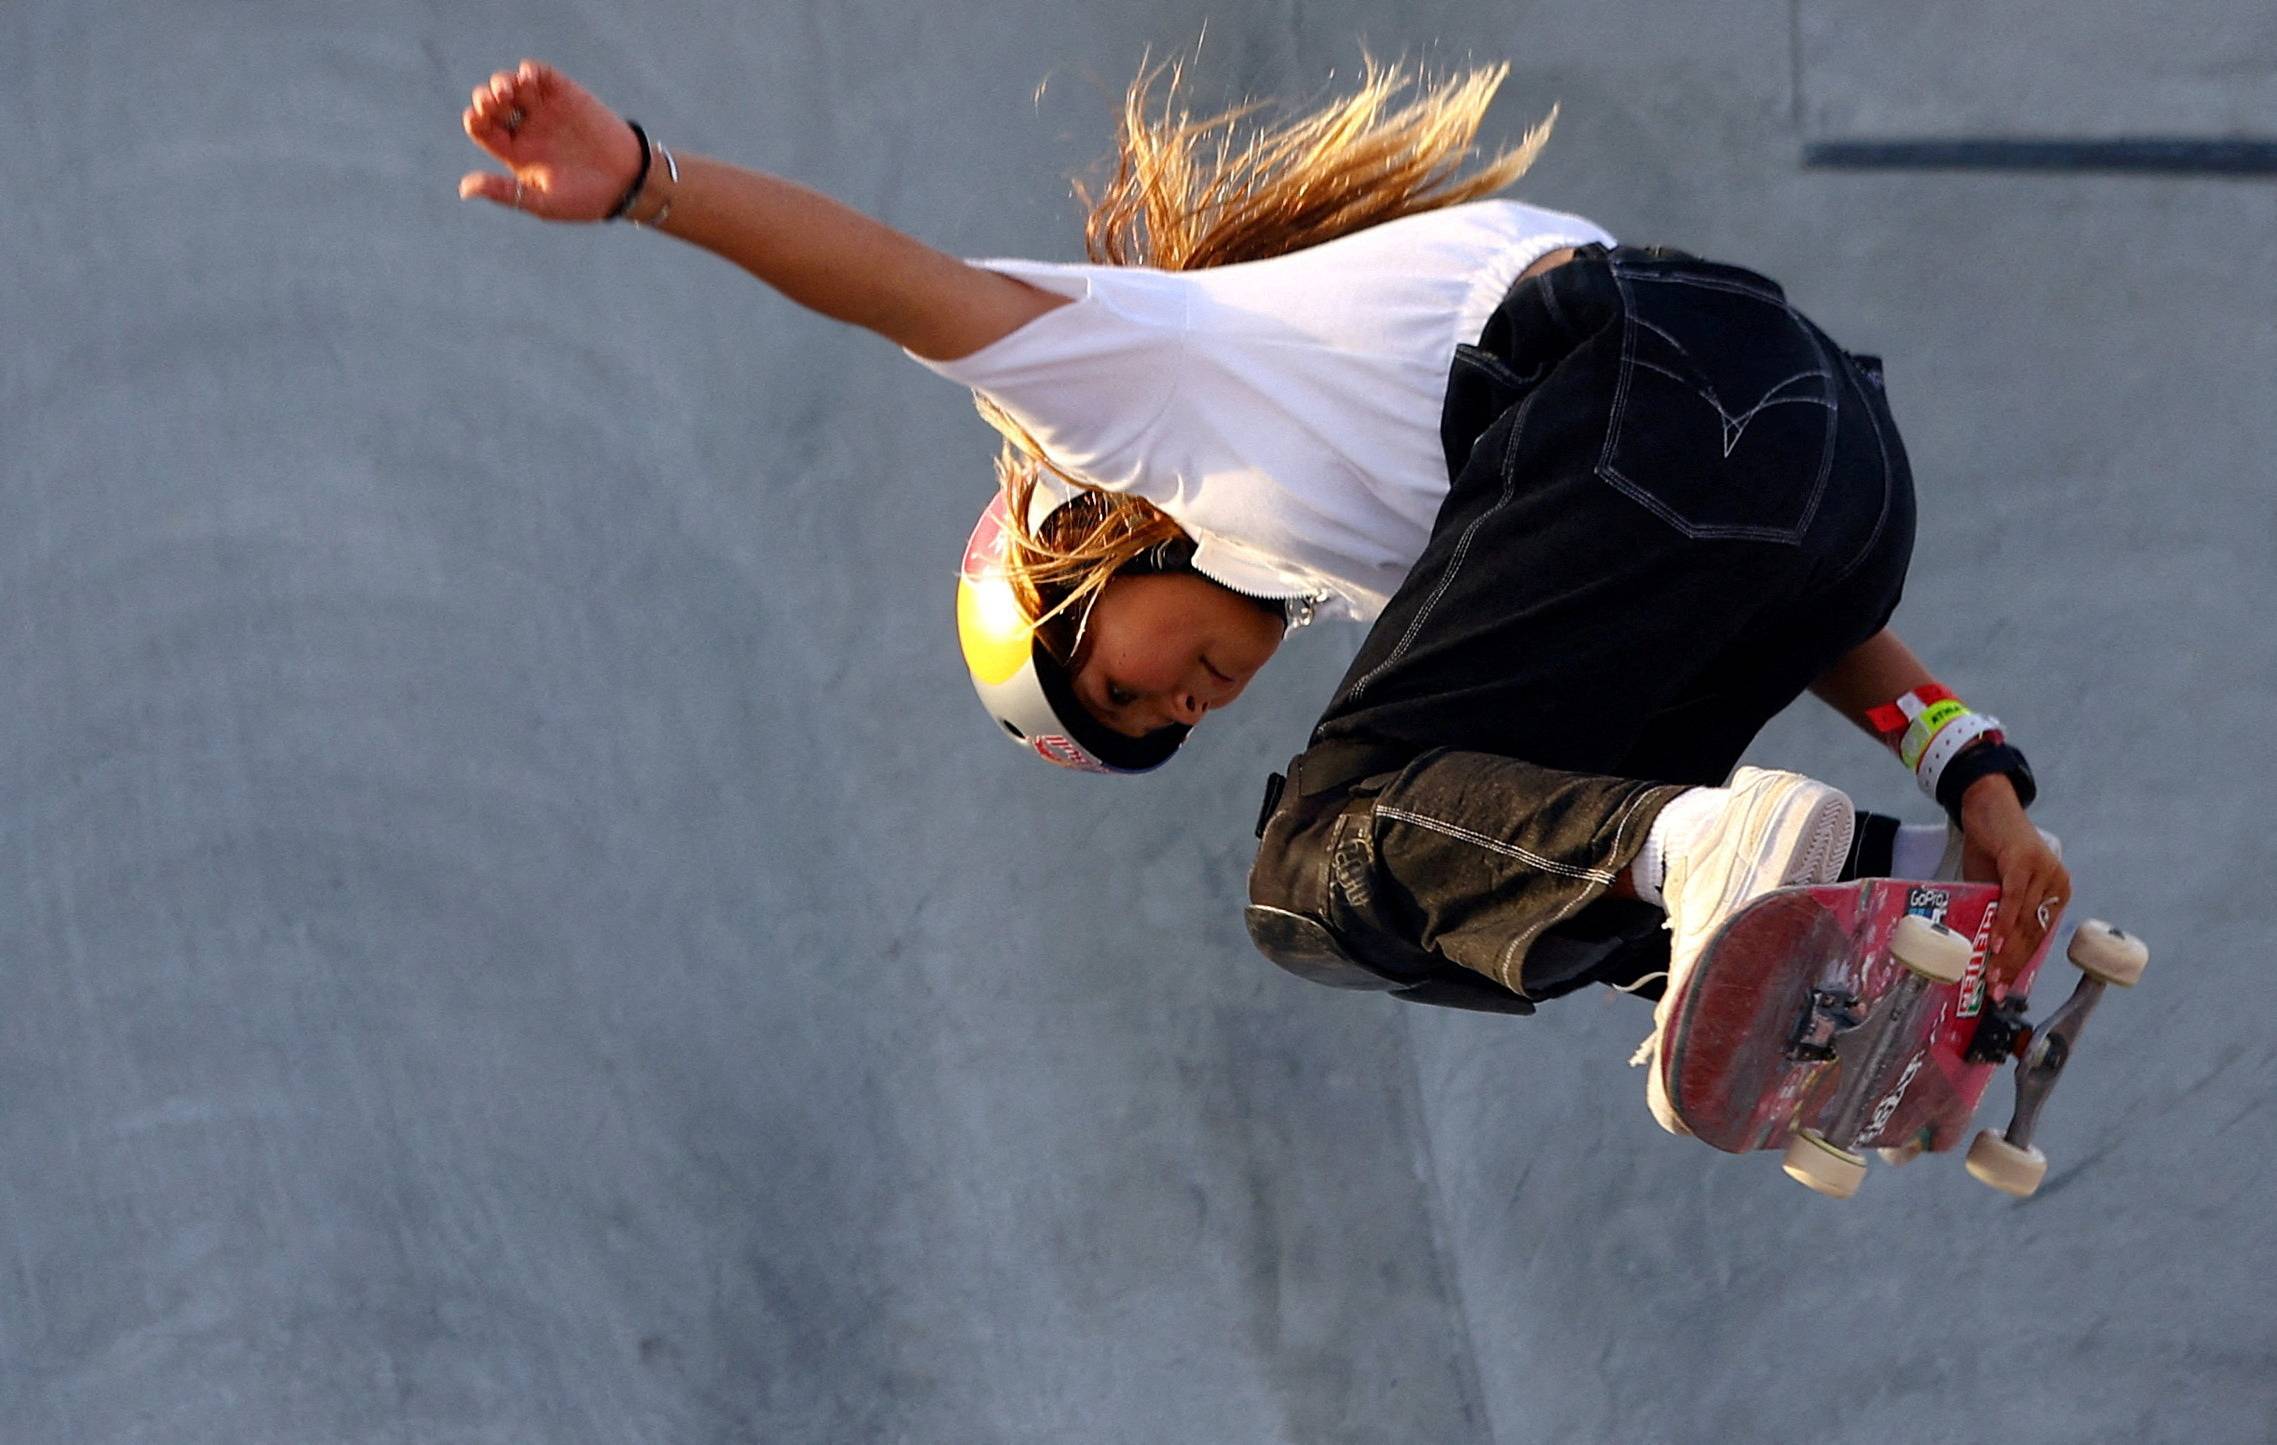 14-year-old Sky Brown claims gold at skateboarding world championships